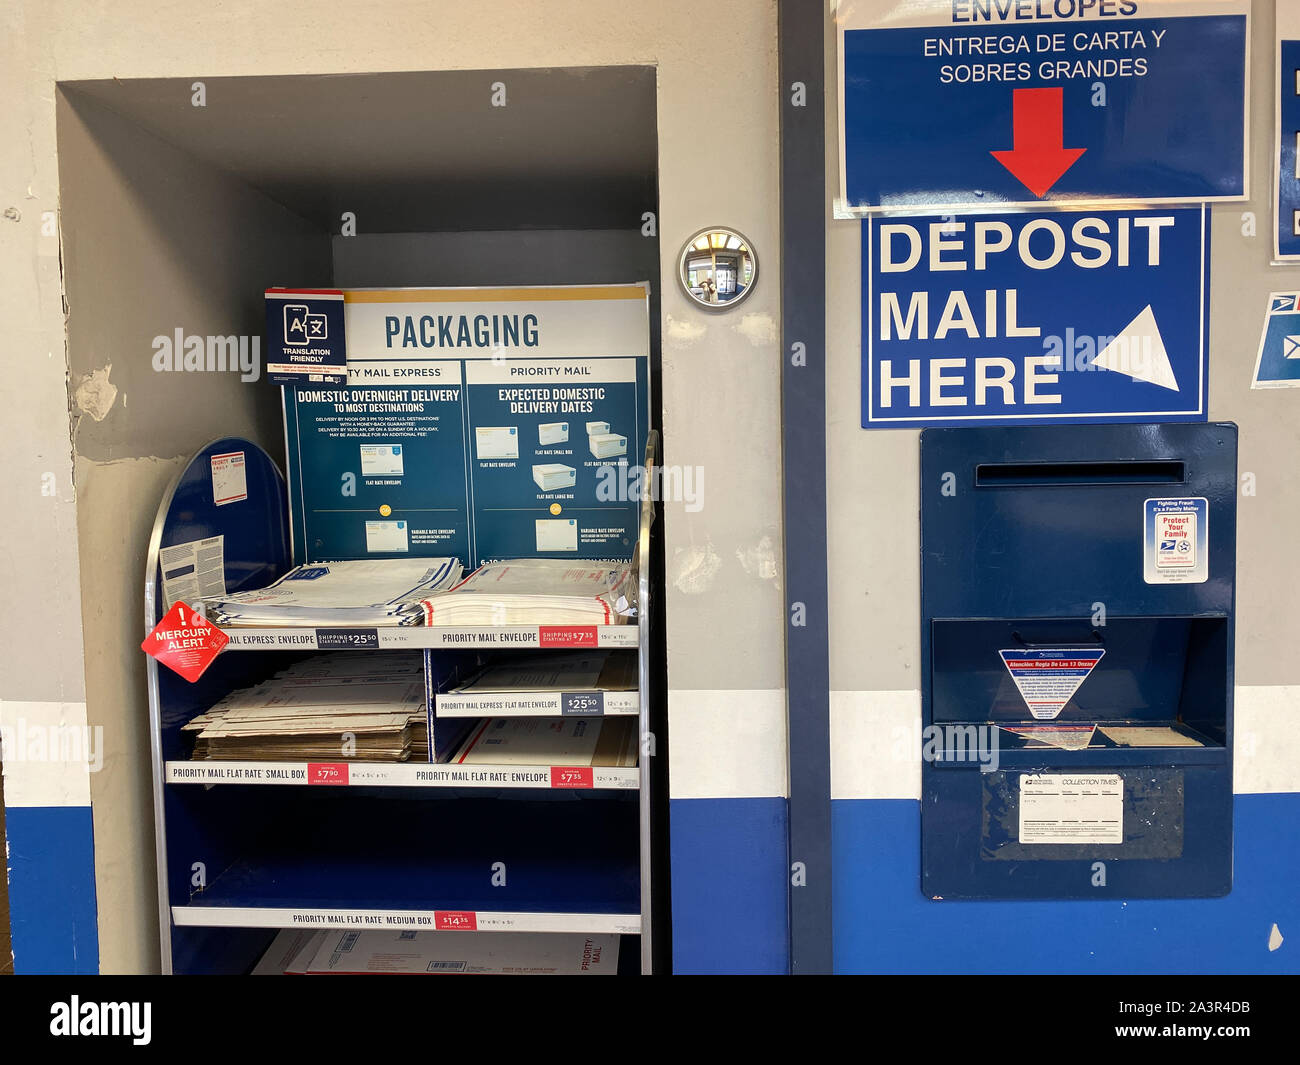 Orlando,FL/USA-10/7/19:  A mail depository in an United States Postal Service, USPS, office next to an international airport in the city of Orlando, F Stock Photo